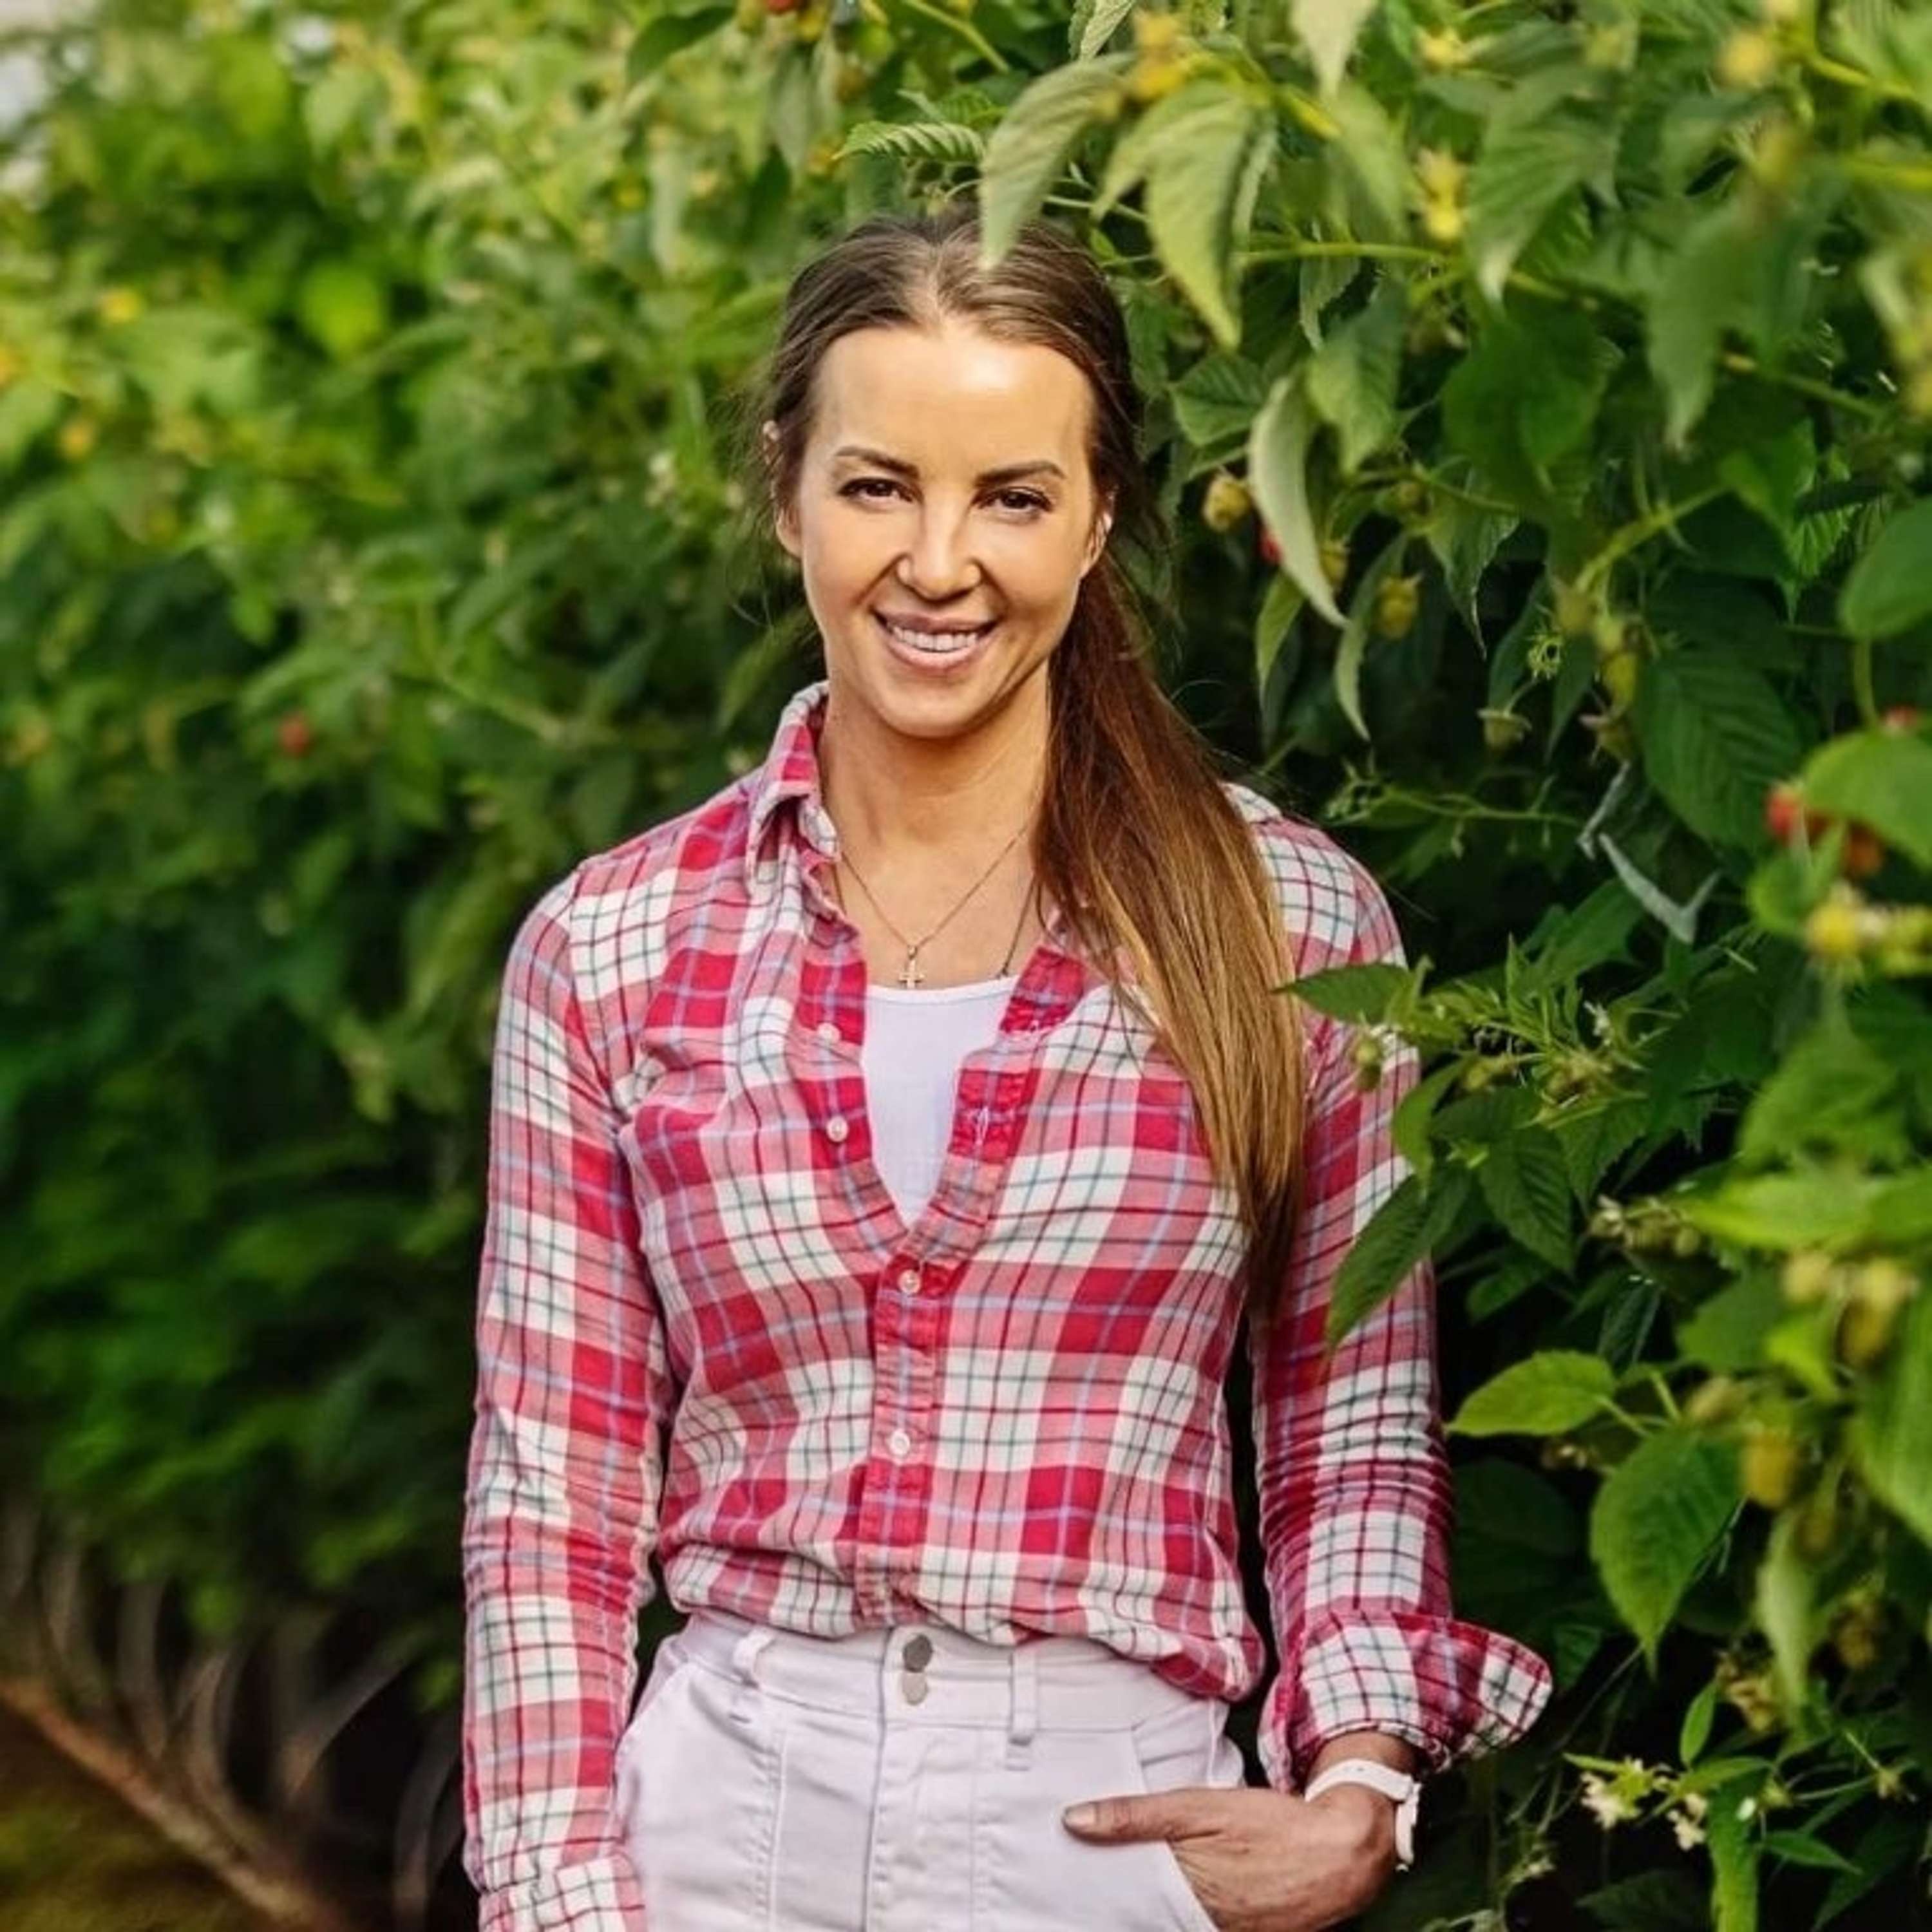 From Left Field Belle Binder has a vision for the future of farming